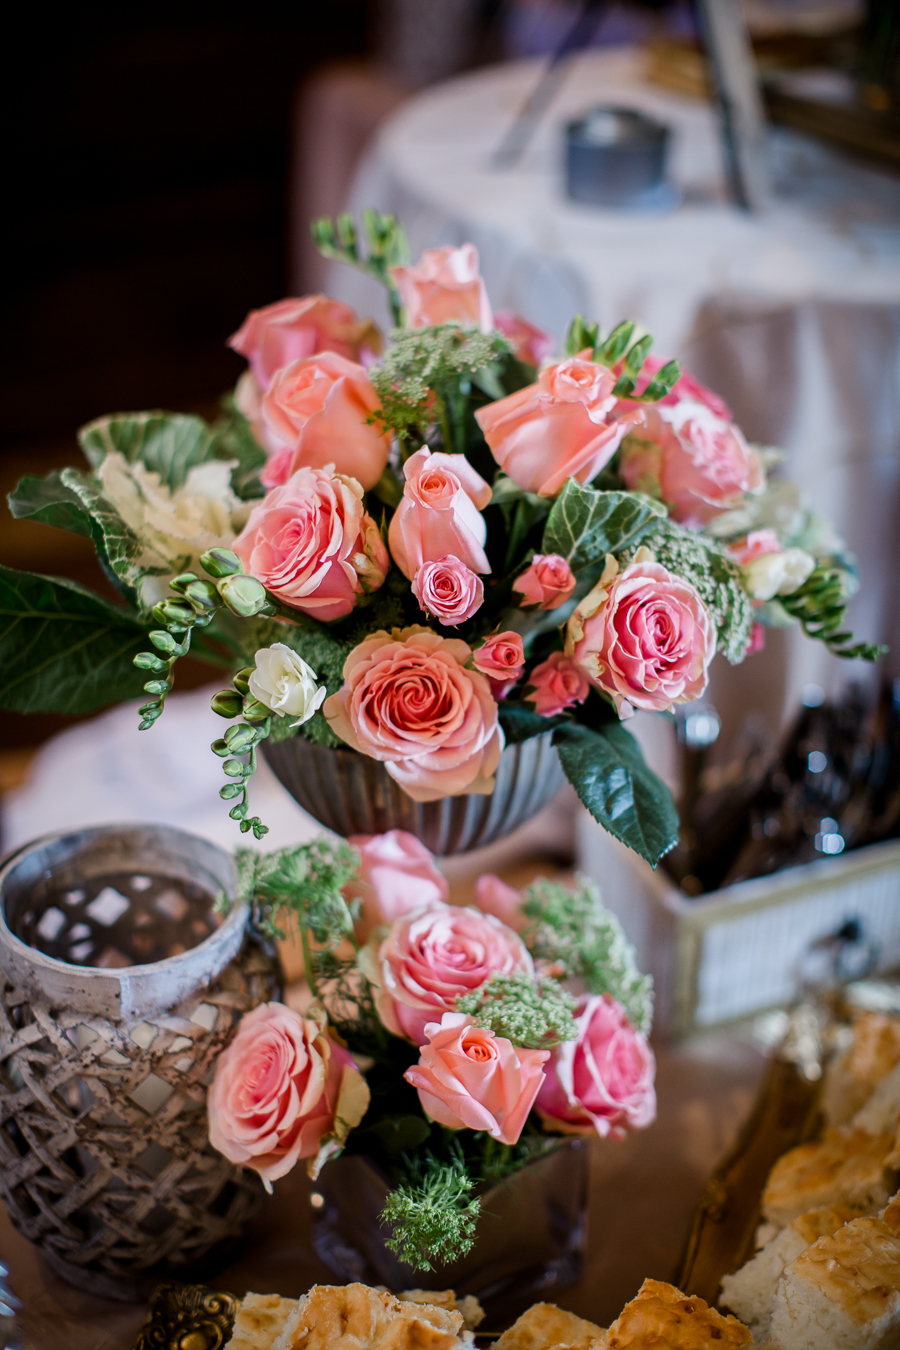 Copper Cellar floral decor at the open house of Knoxville Wedding Venue, Hunter Valley Farm, by Knoxville Wedding Photographer, Amanda May Photos.